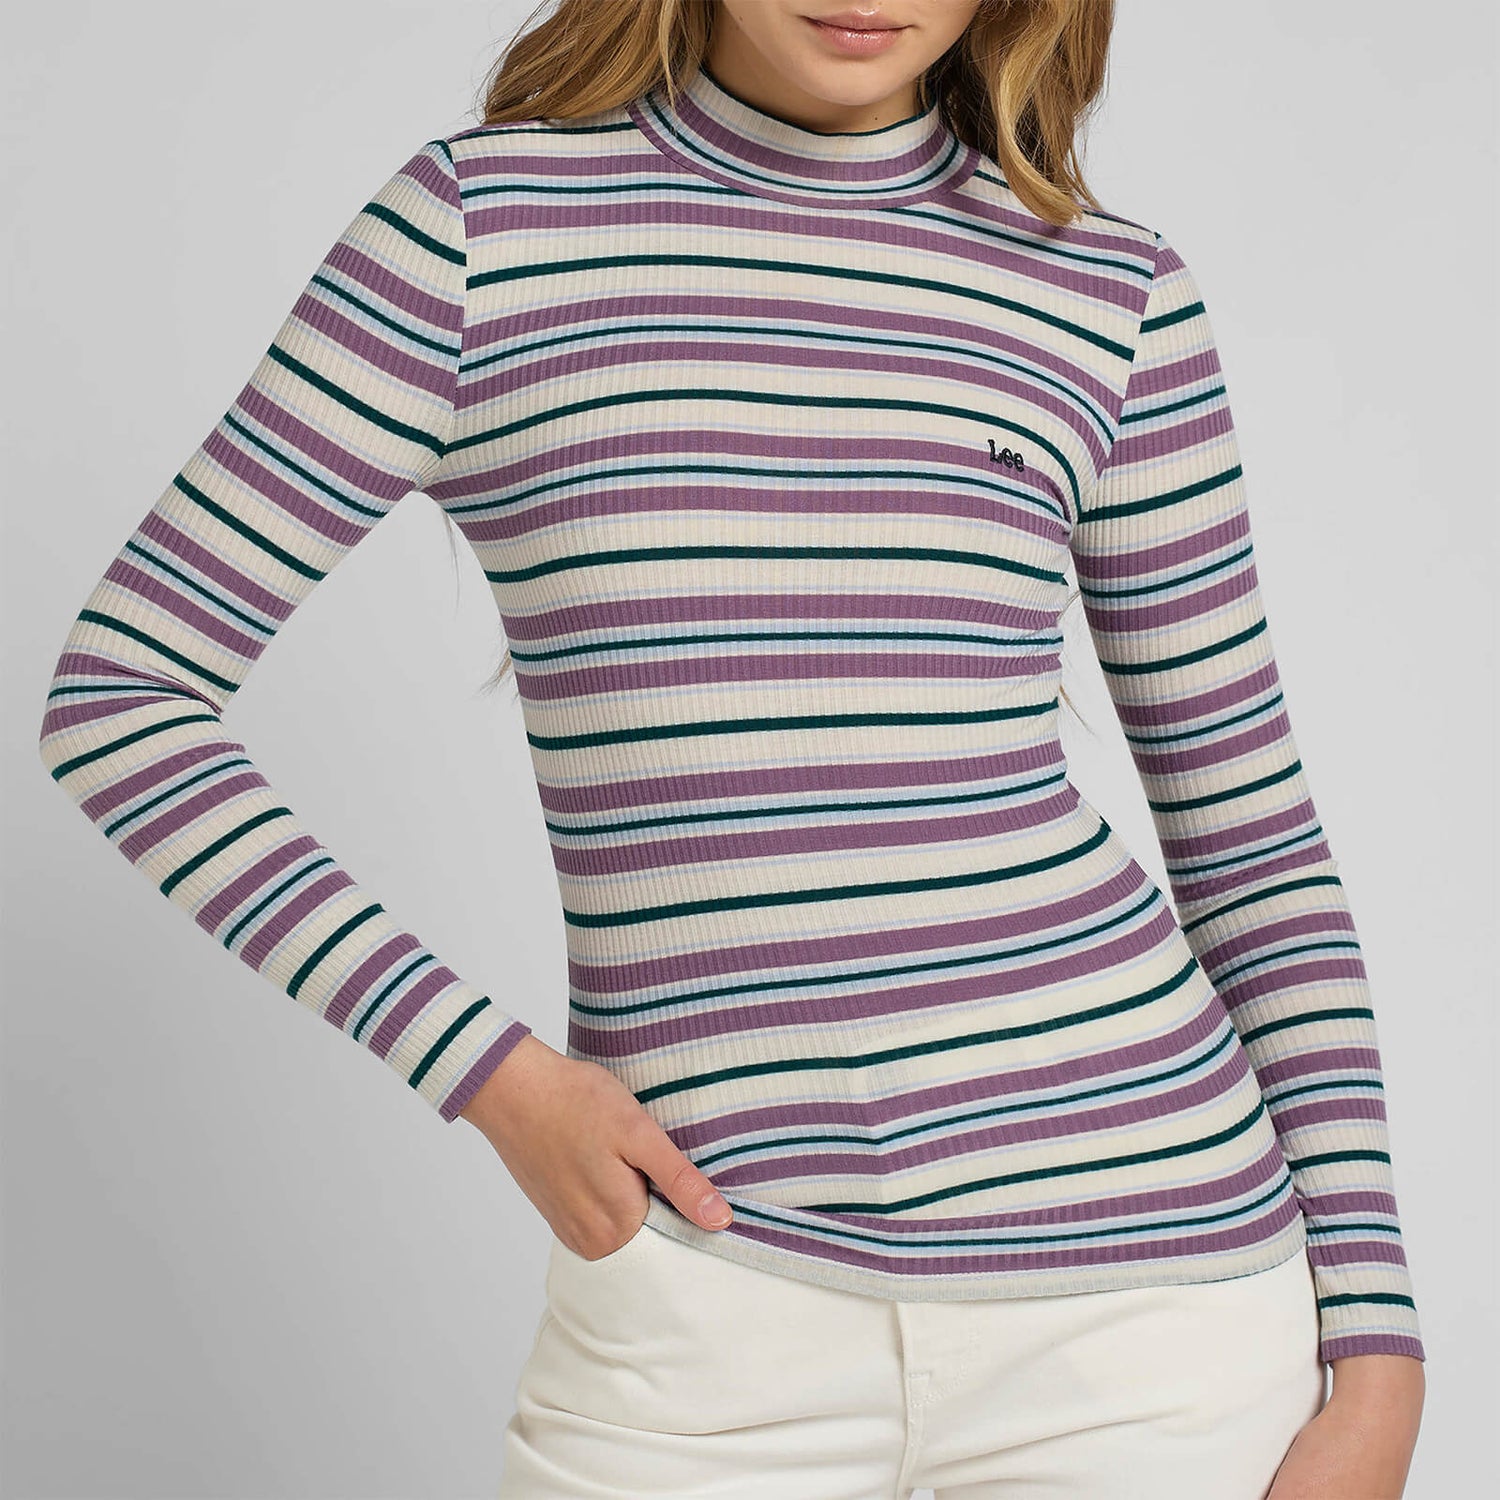 Lee Striped Ribbed Jersey Top - XS